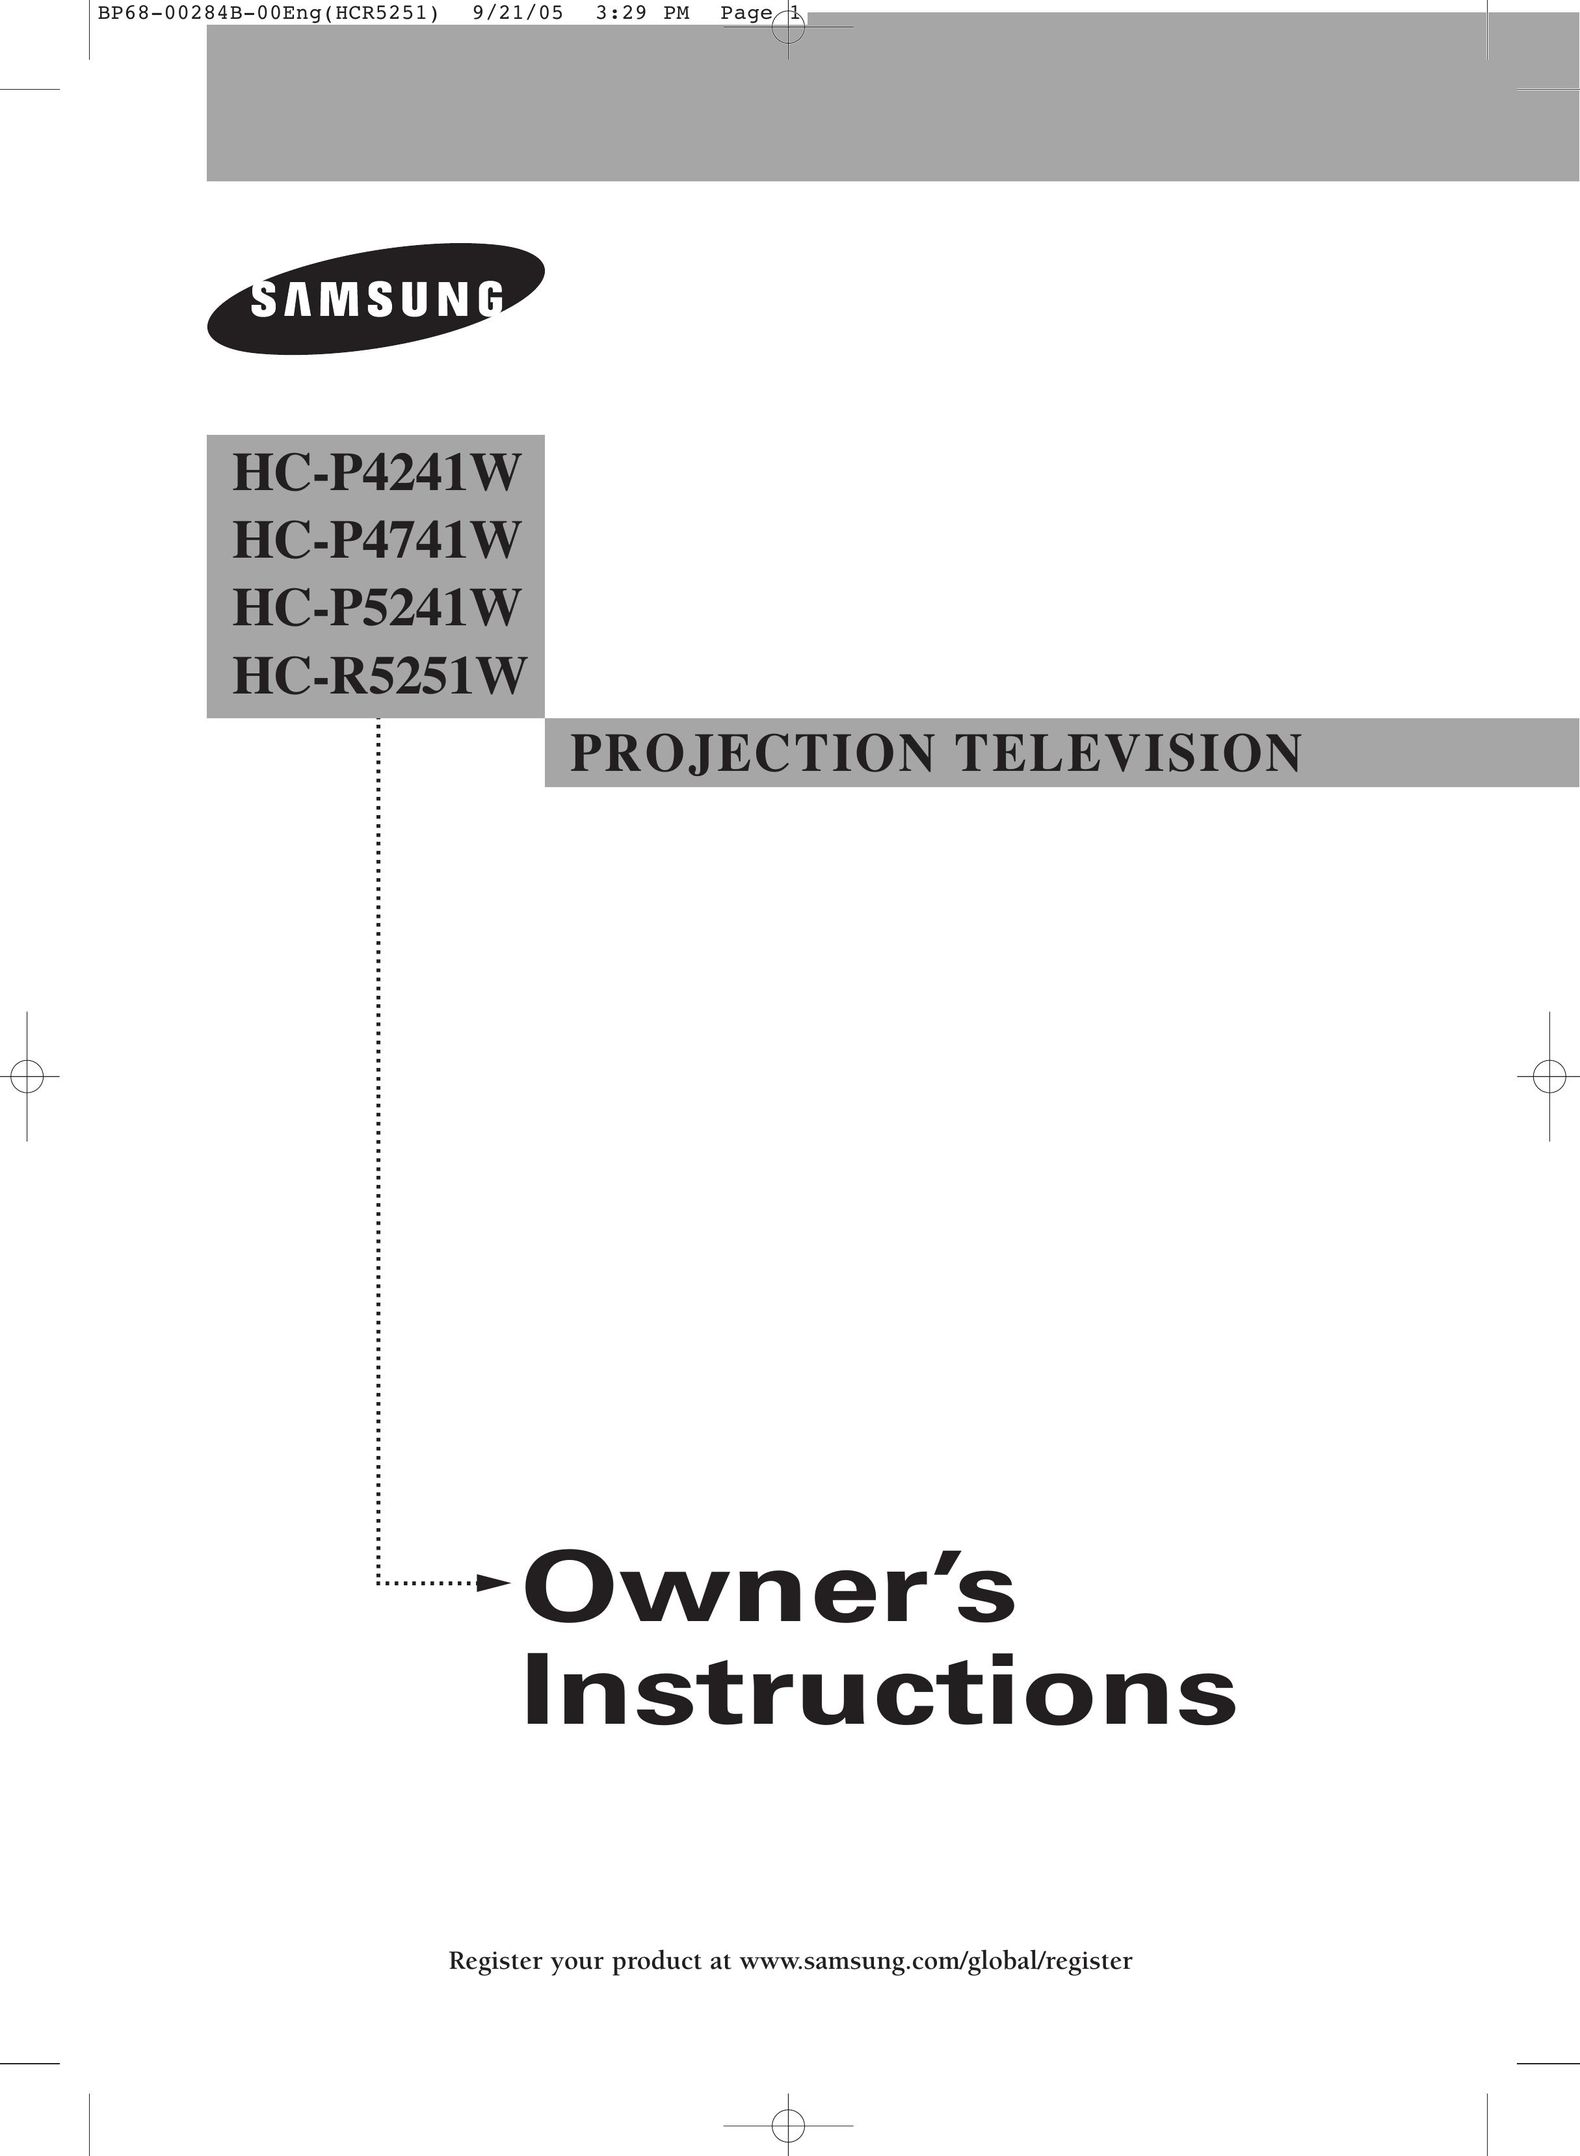 Samsung HC-R5251W Projection Television User Manual